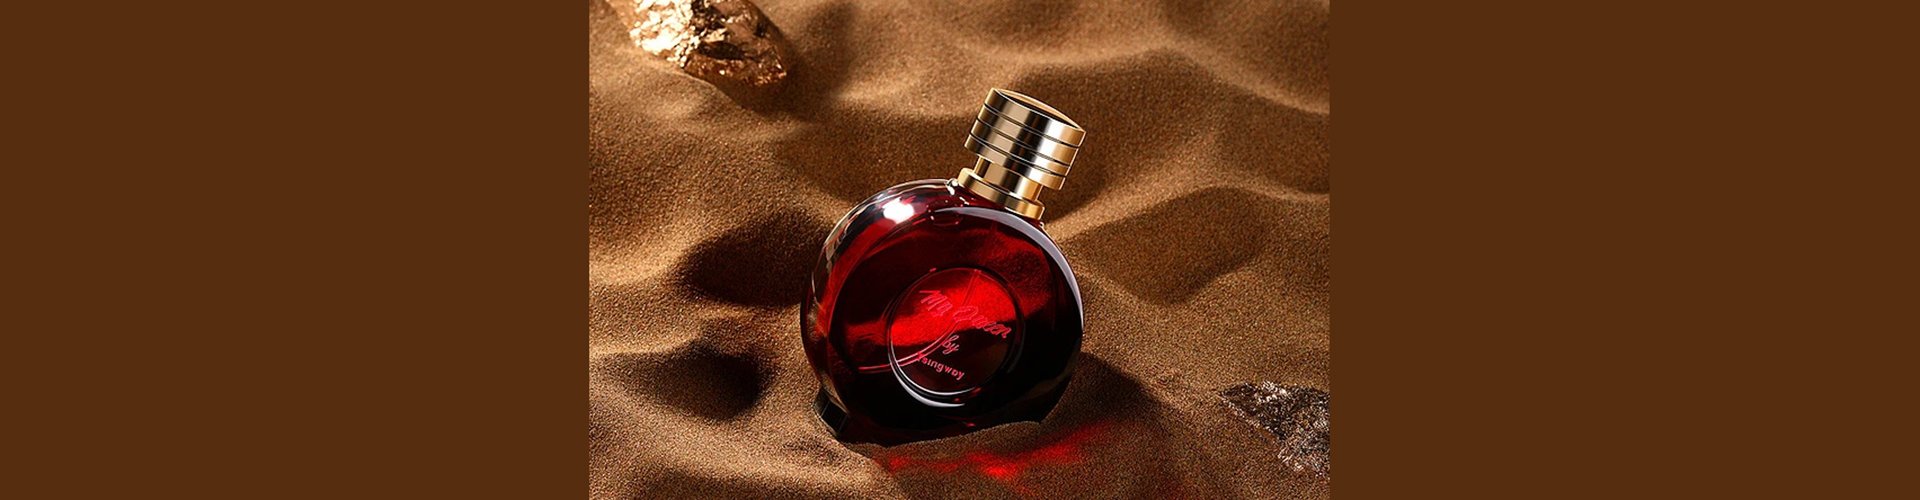 Attractive Red Perfume Bottle